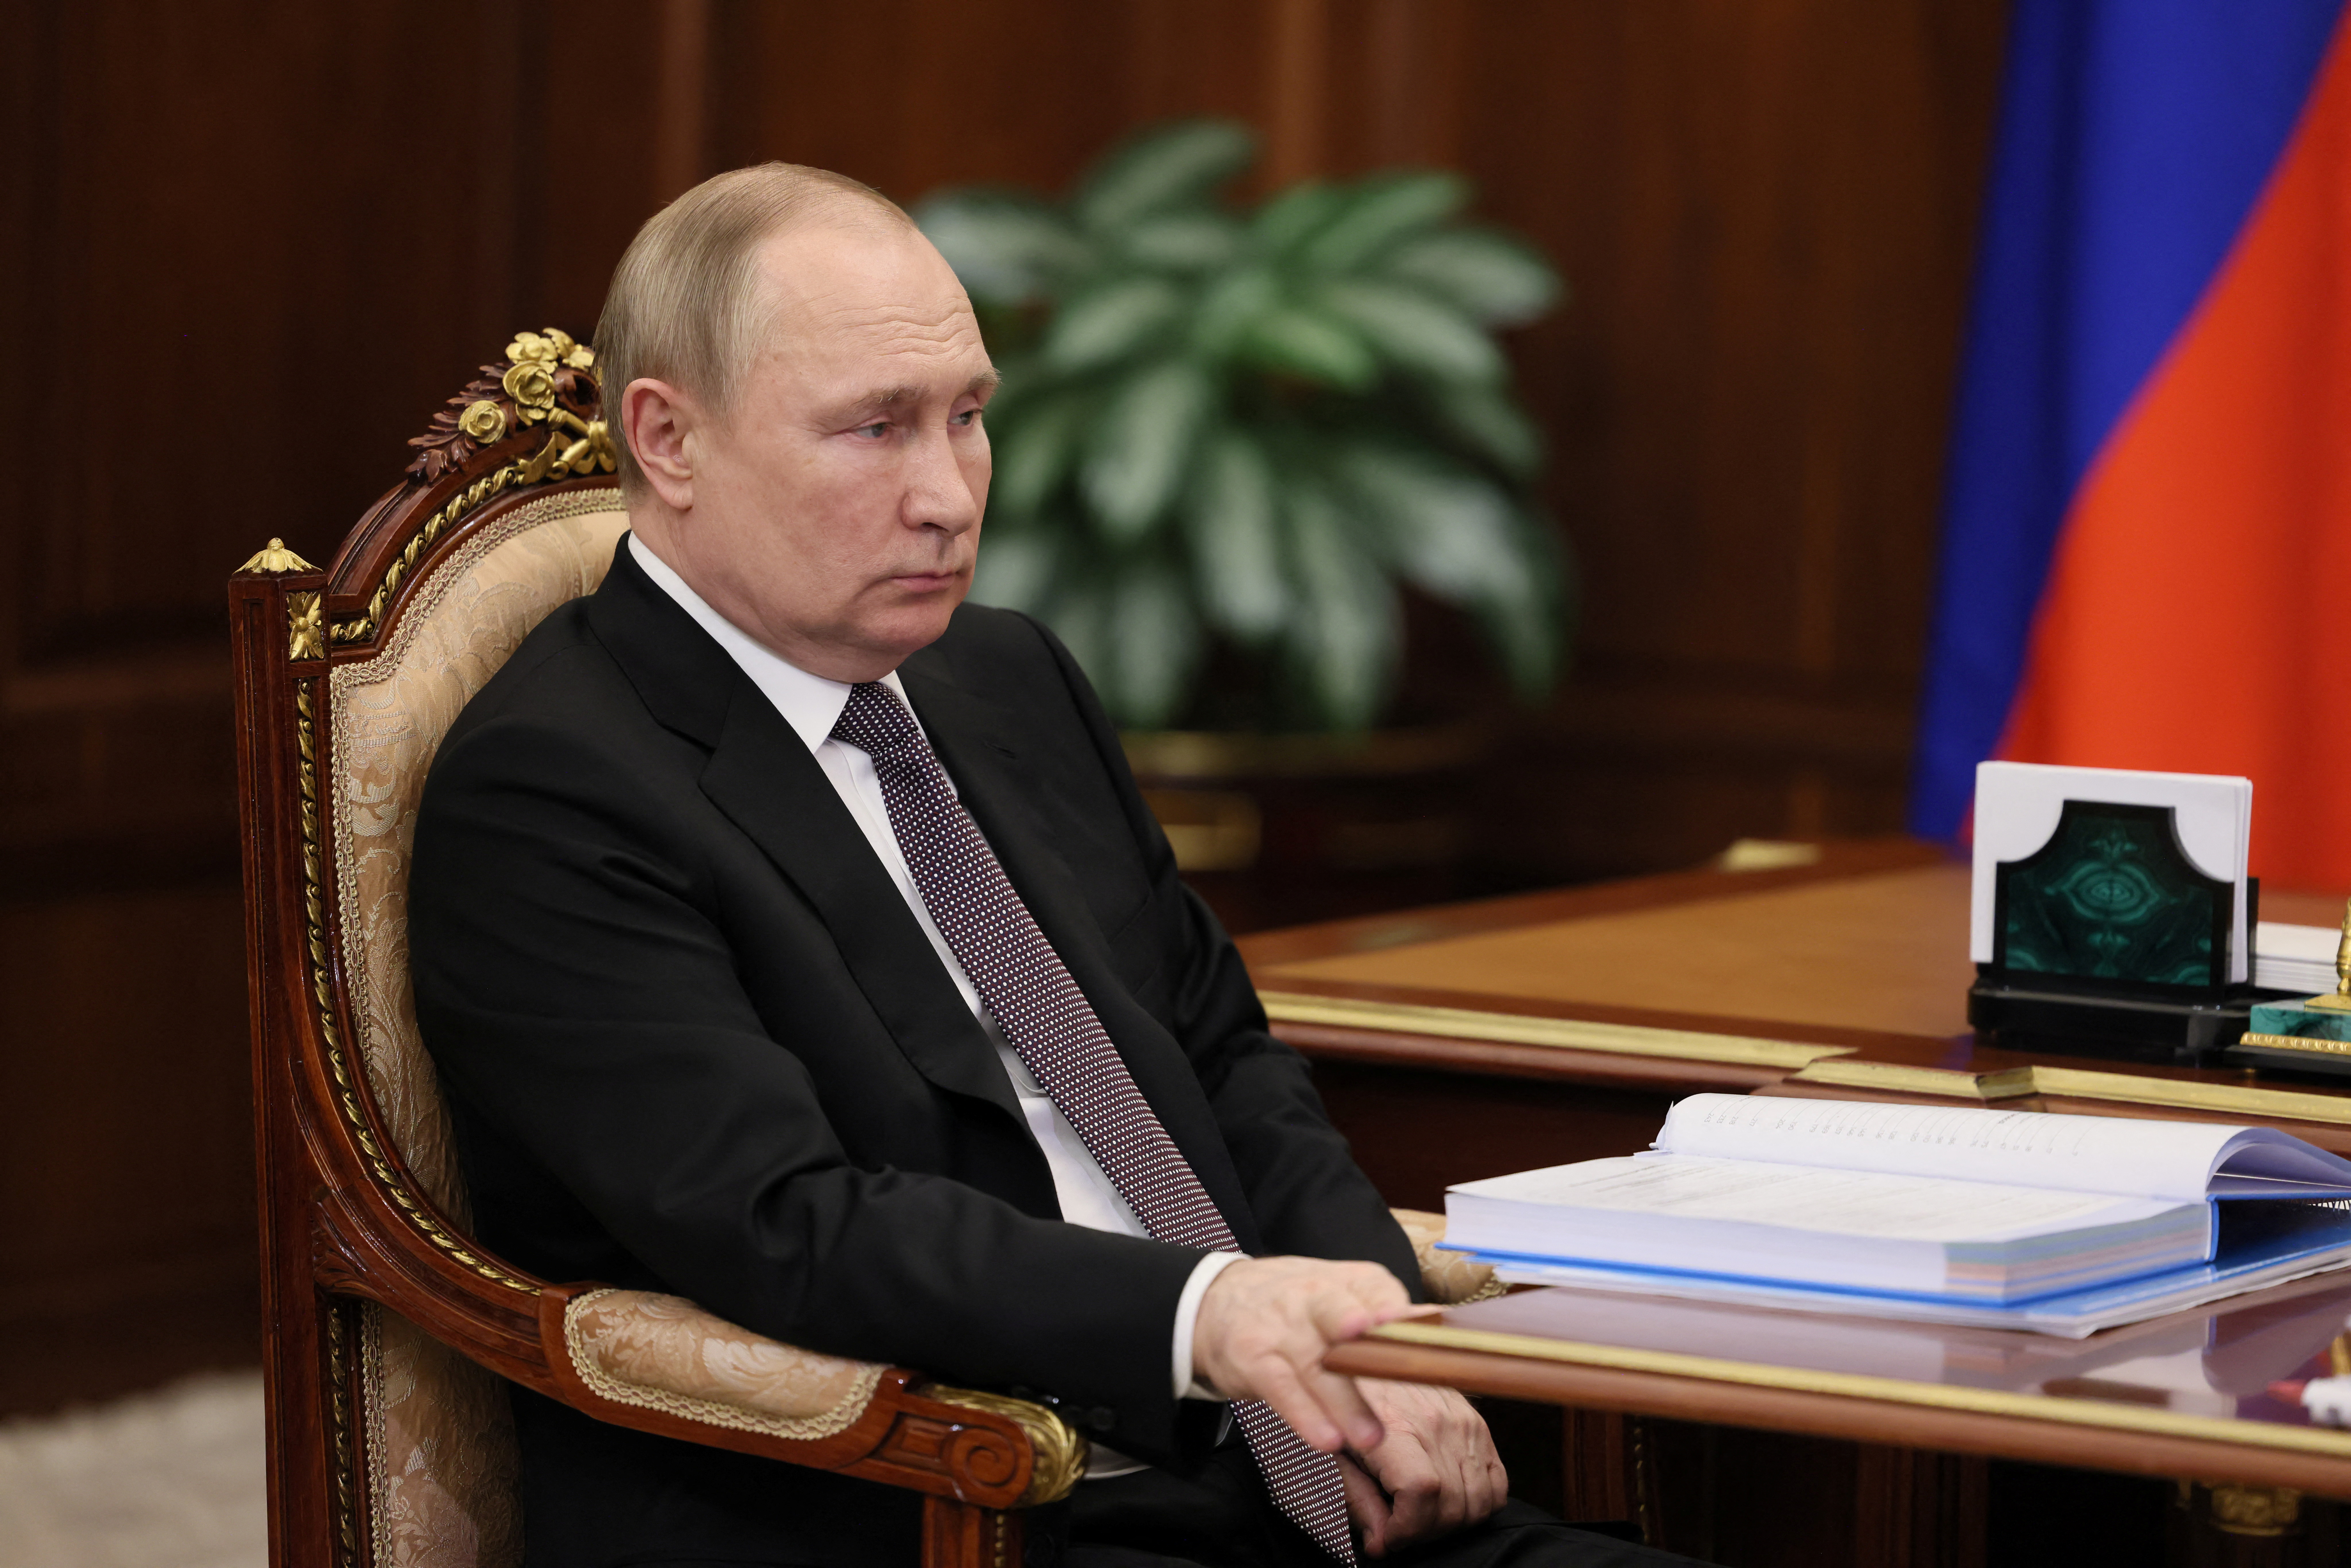 Russian President Vladimir Putin meets with Commissioner for Human Rights Tatyana Moskalkova in Moscow